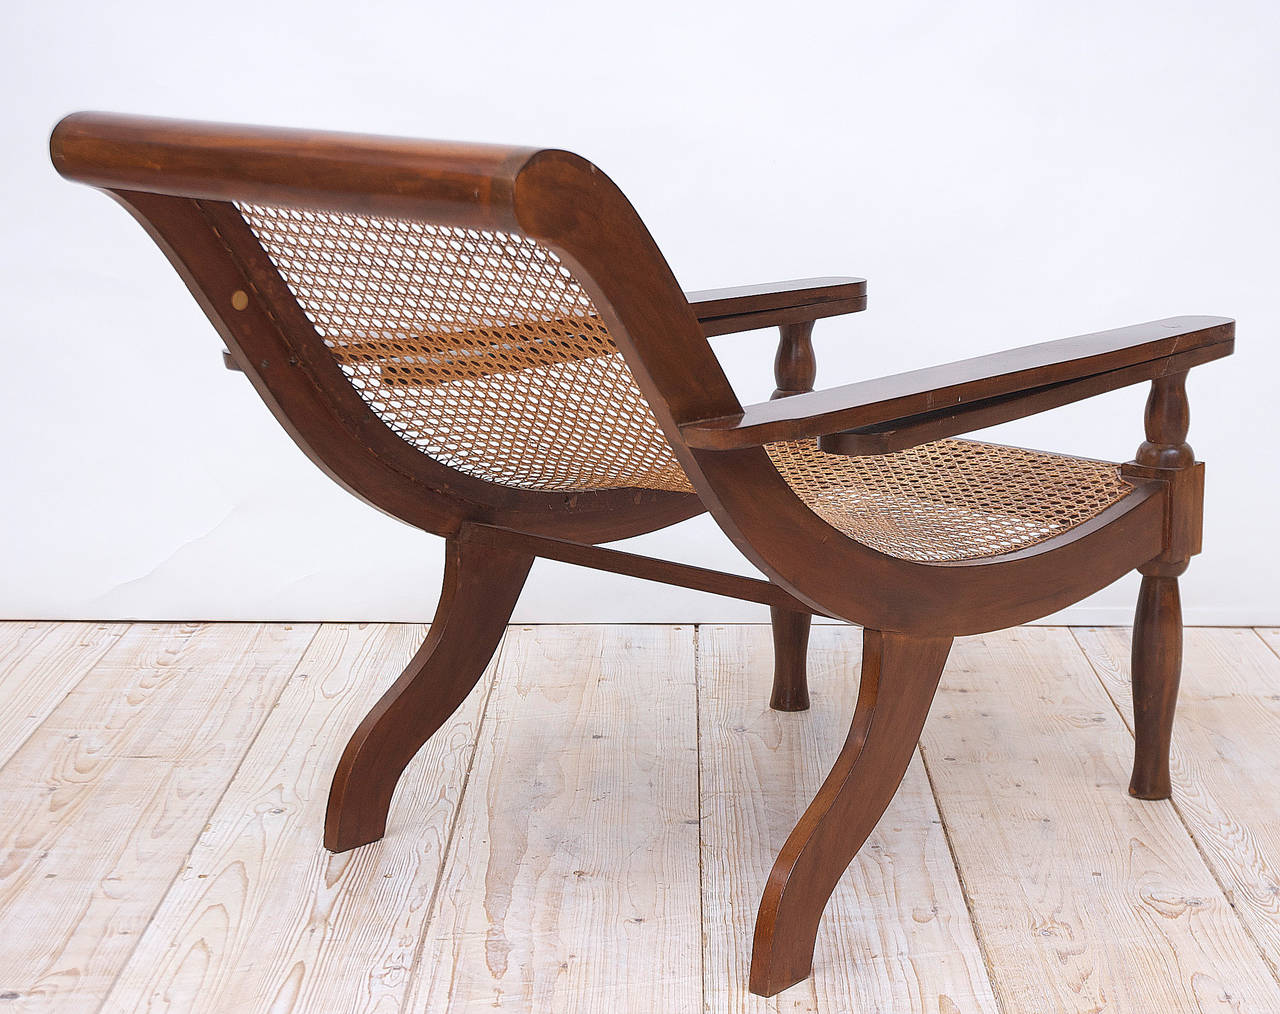 Unknown West Indies Planters Chair in Mahogany with Caning